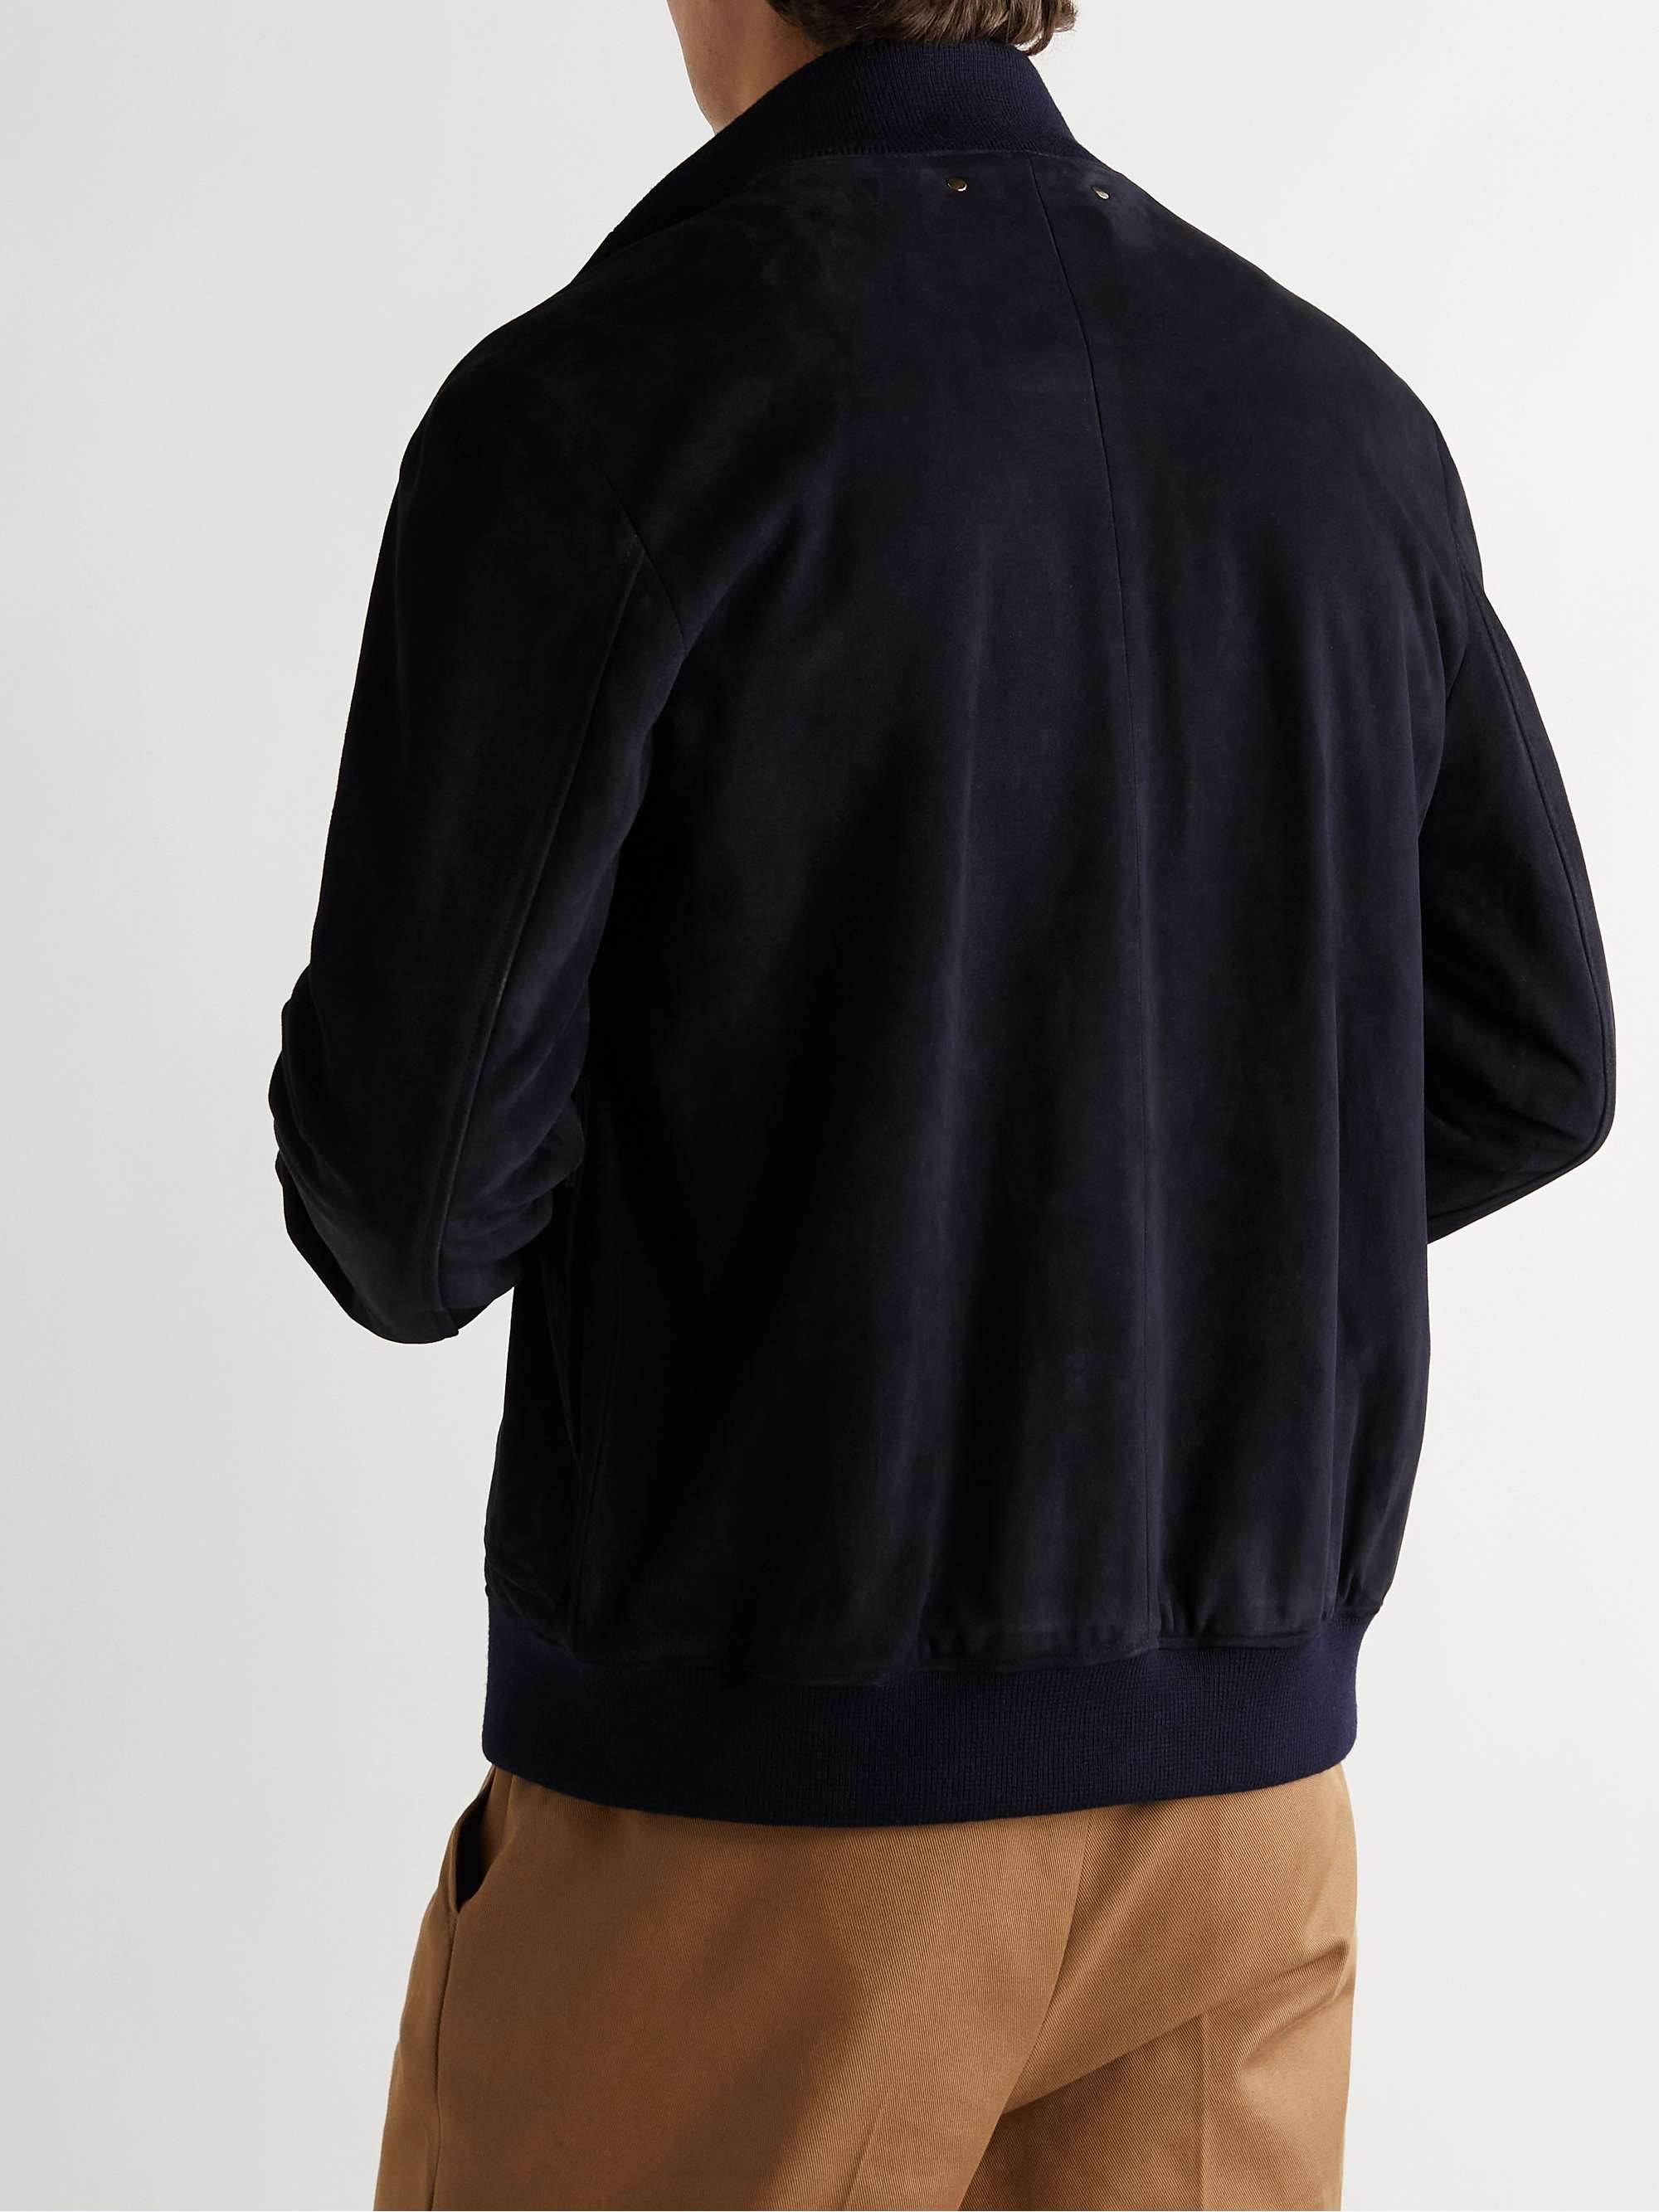 PAUL SMITH Suede Bomber Jacket